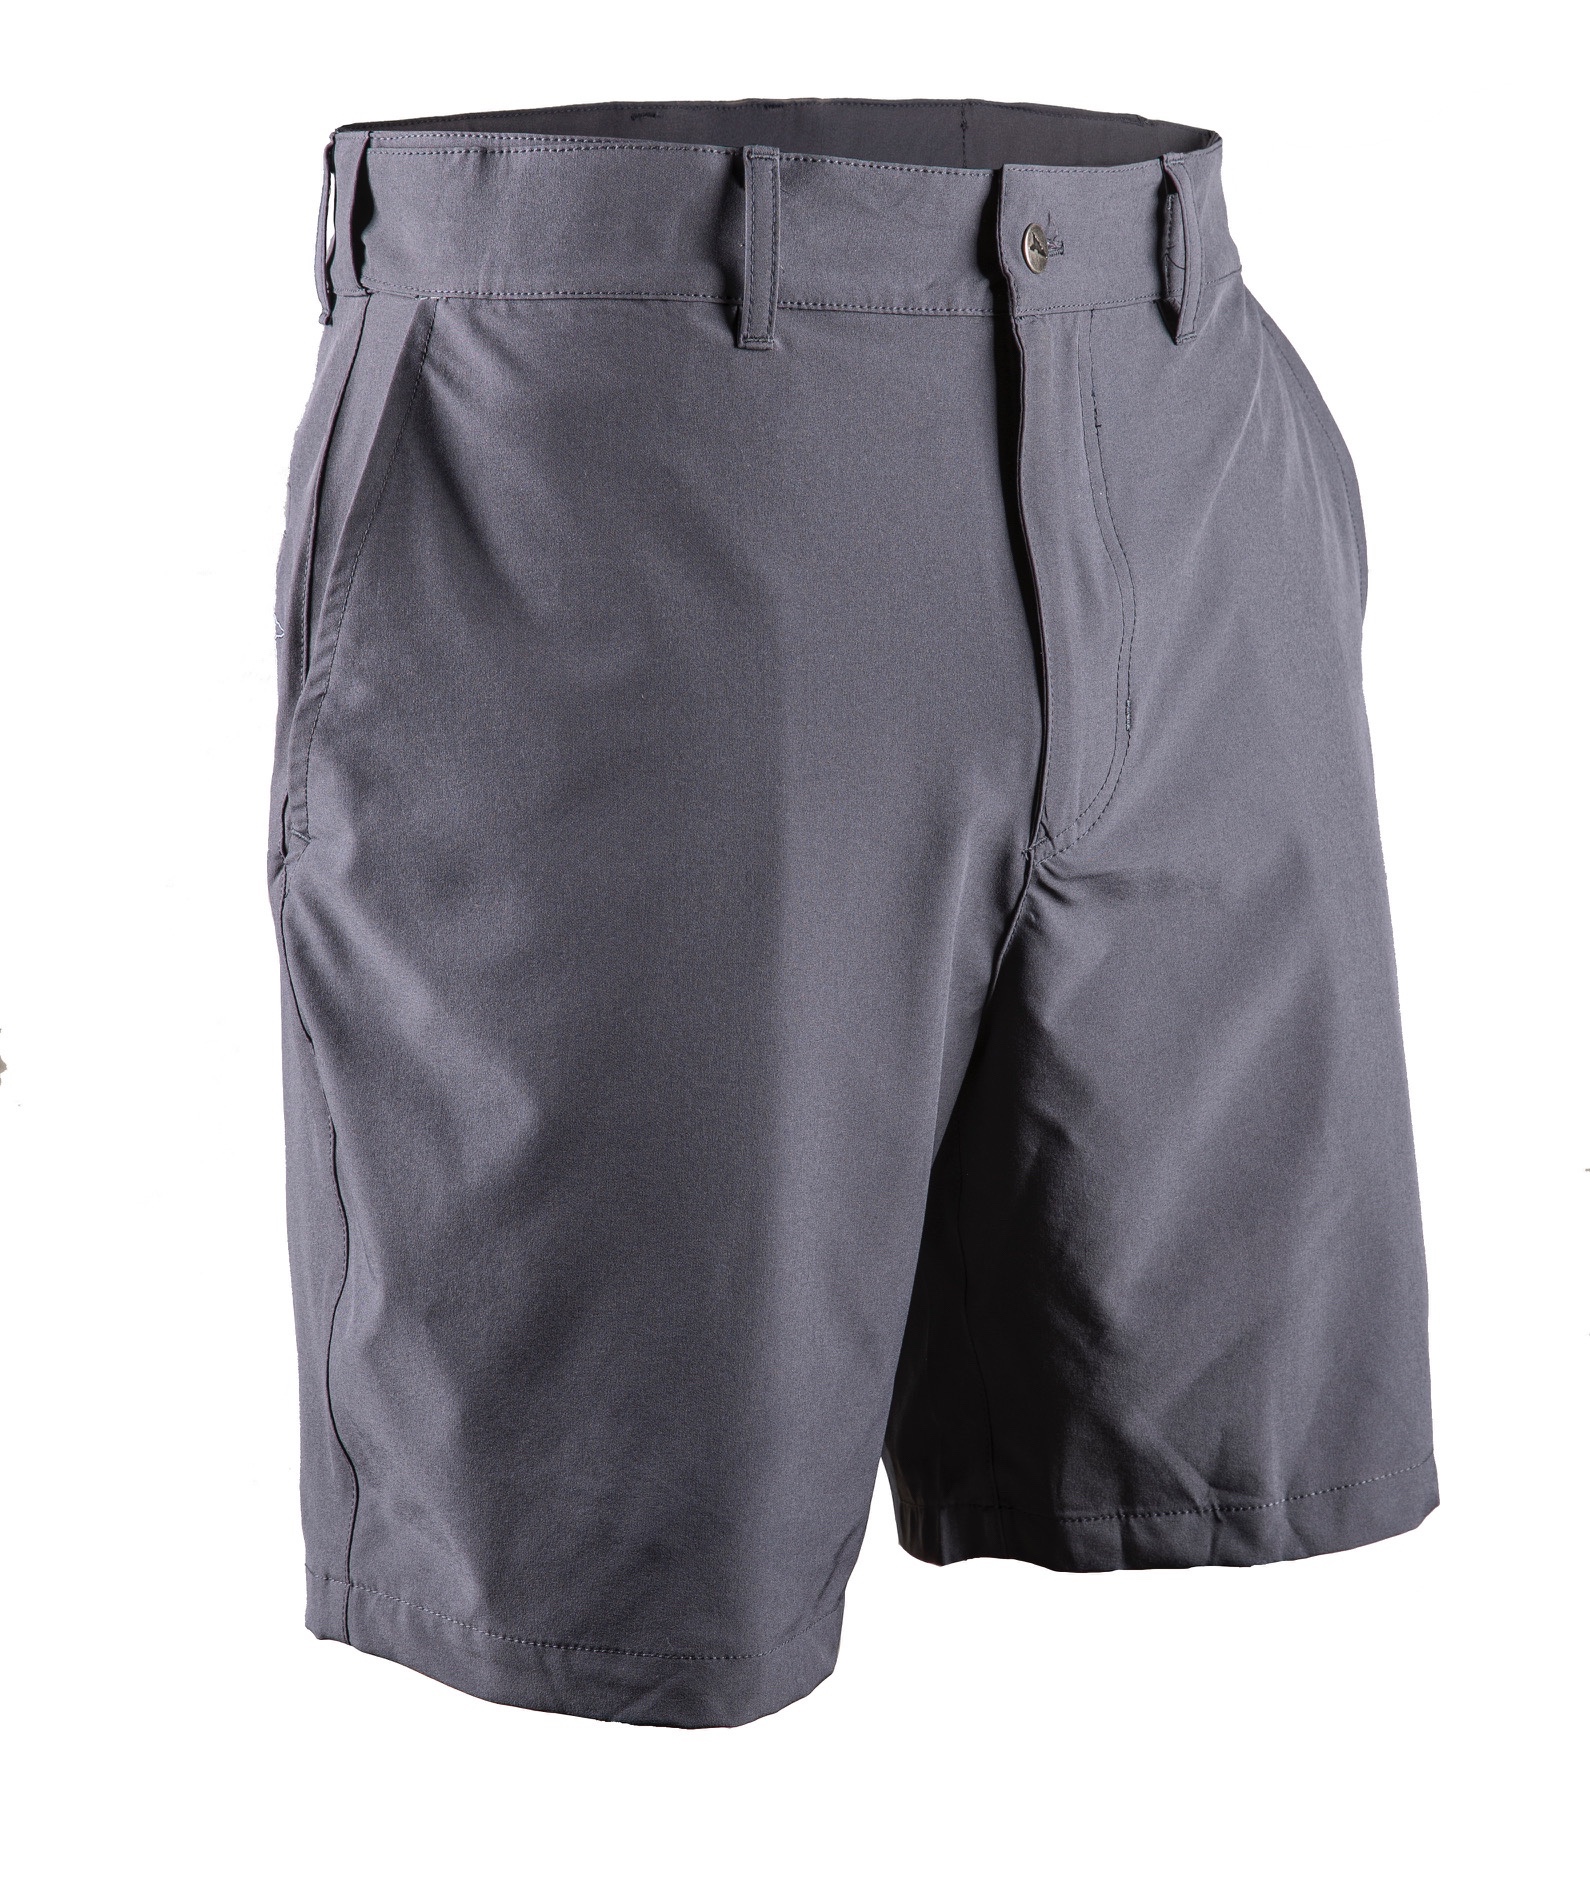 FirstSpear Friday Focus: New Black Pub Shorts - Soldier Systems Daily